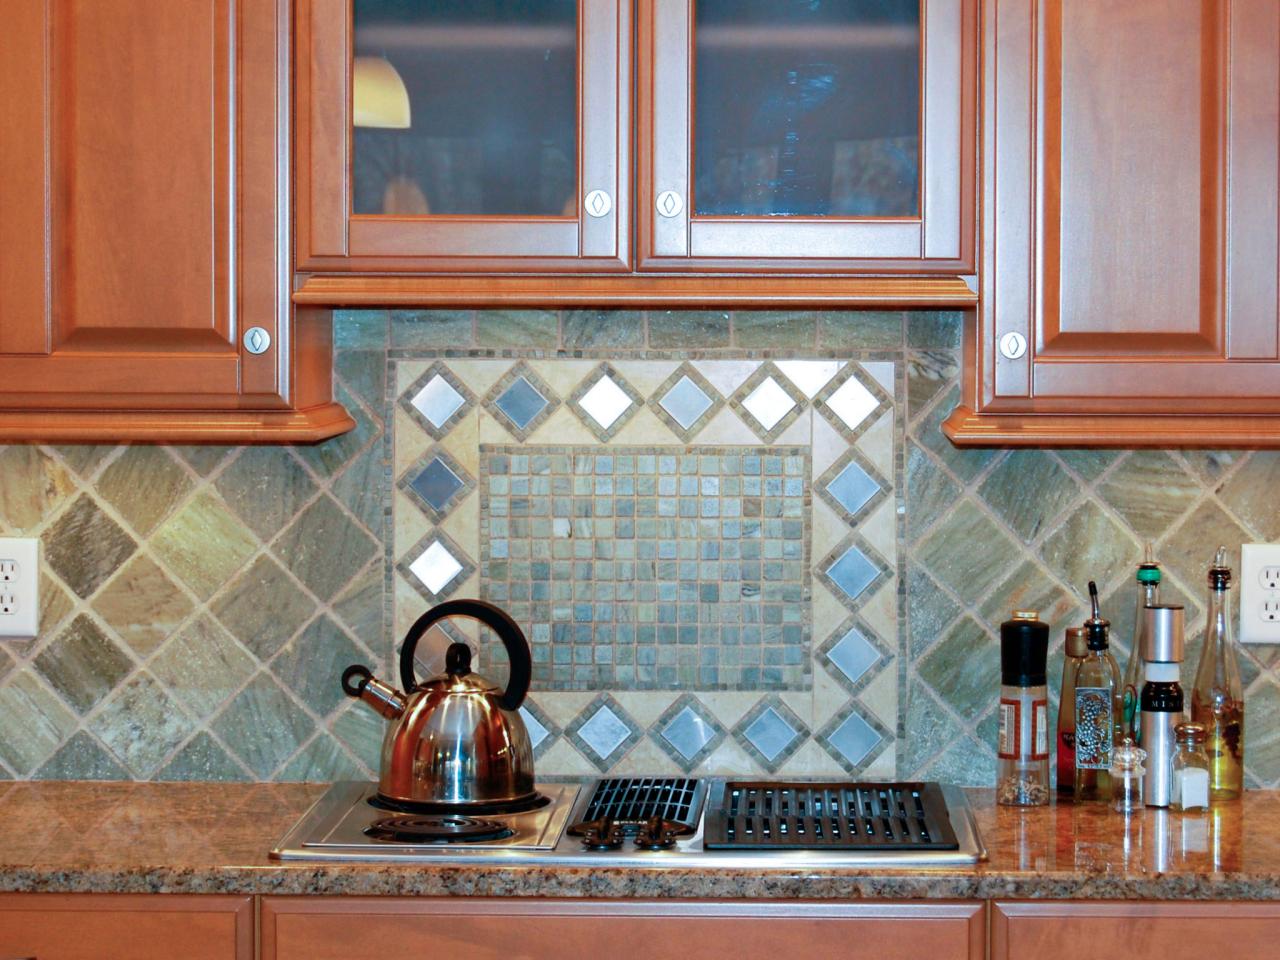 Tumbled Marble Backsplashes Pictures & Ideas From HGTV   HGTV